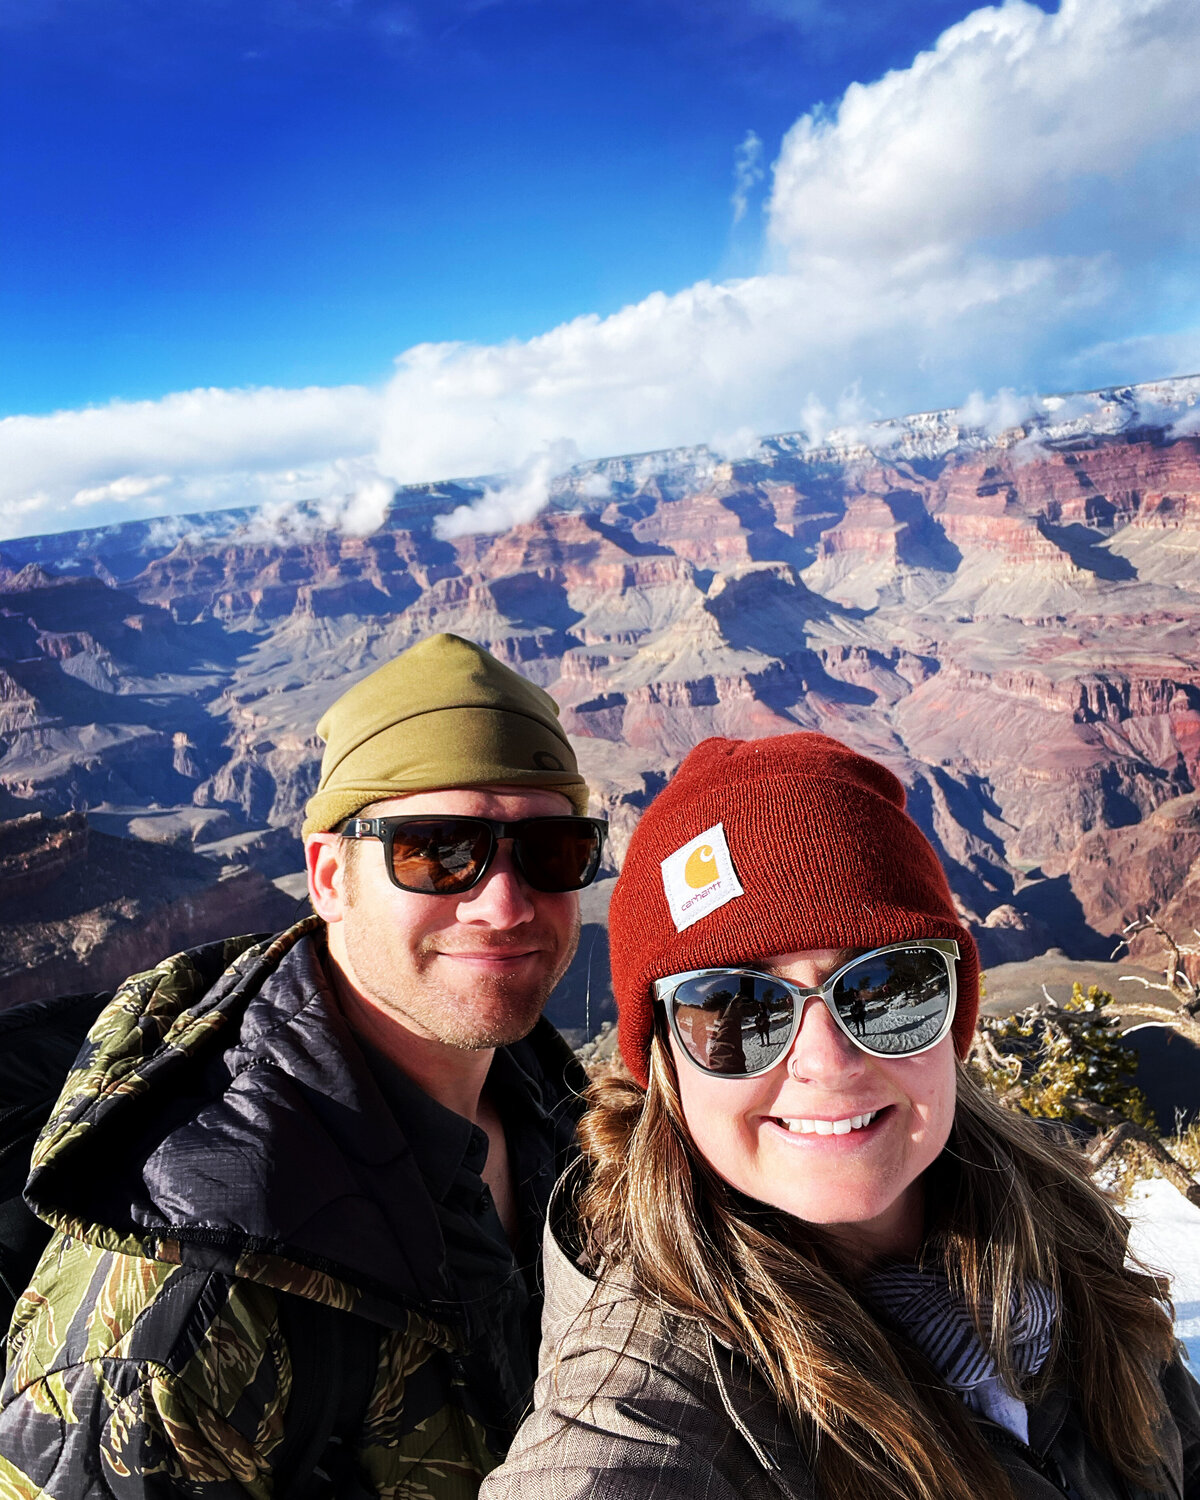 10 year Anniversary we slept in a tent in the snow at the Grand Canyon